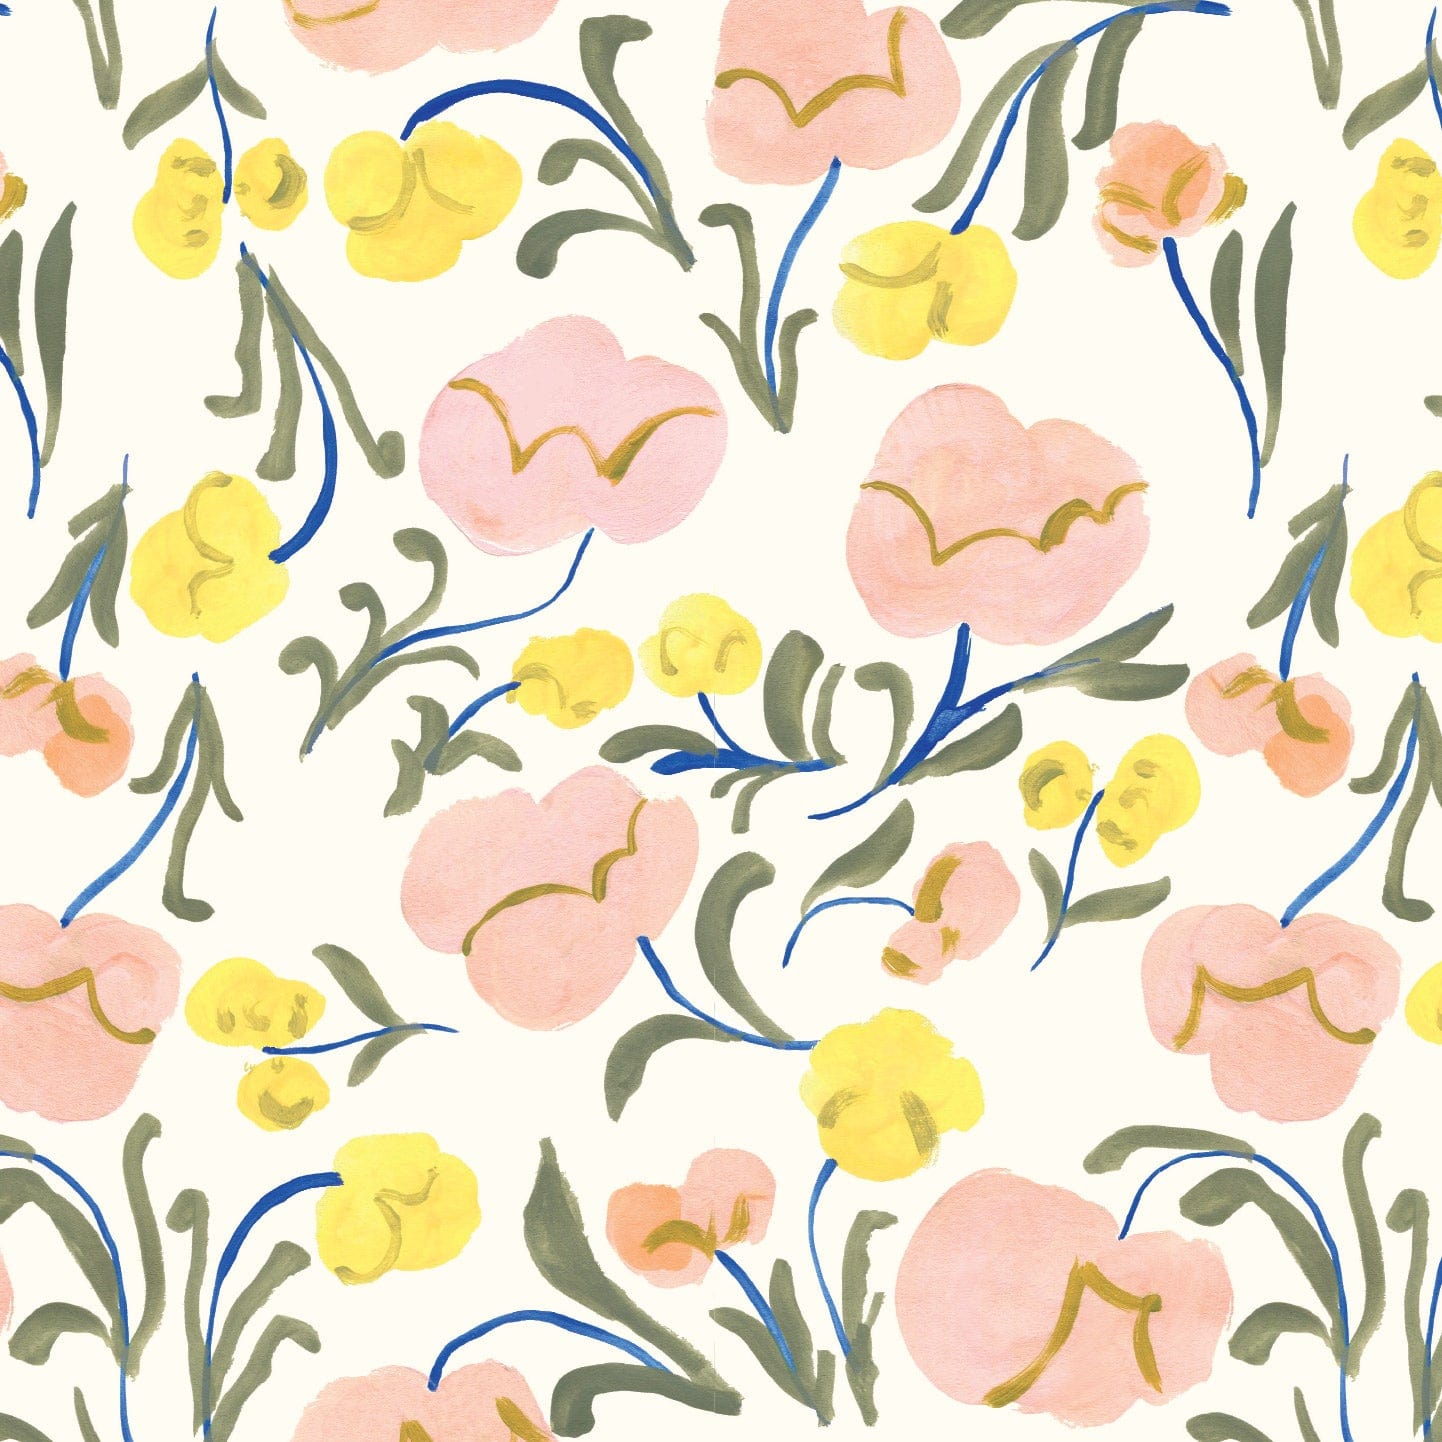 Floral wallpaper sample with pink and yellow flowers, blue stems and green leaves